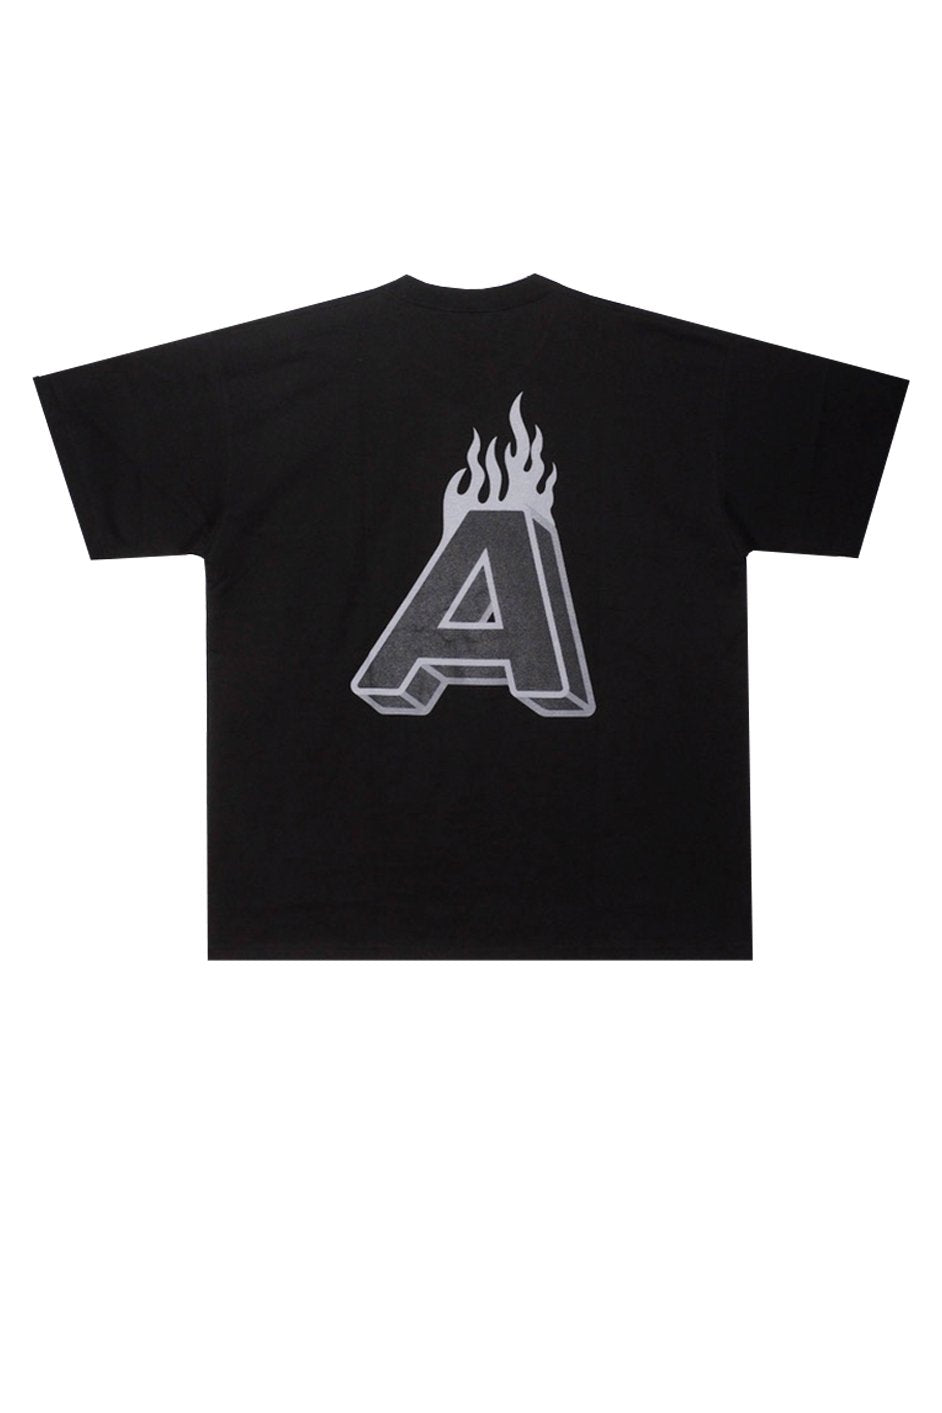 A FIRE TEE "exclusive"